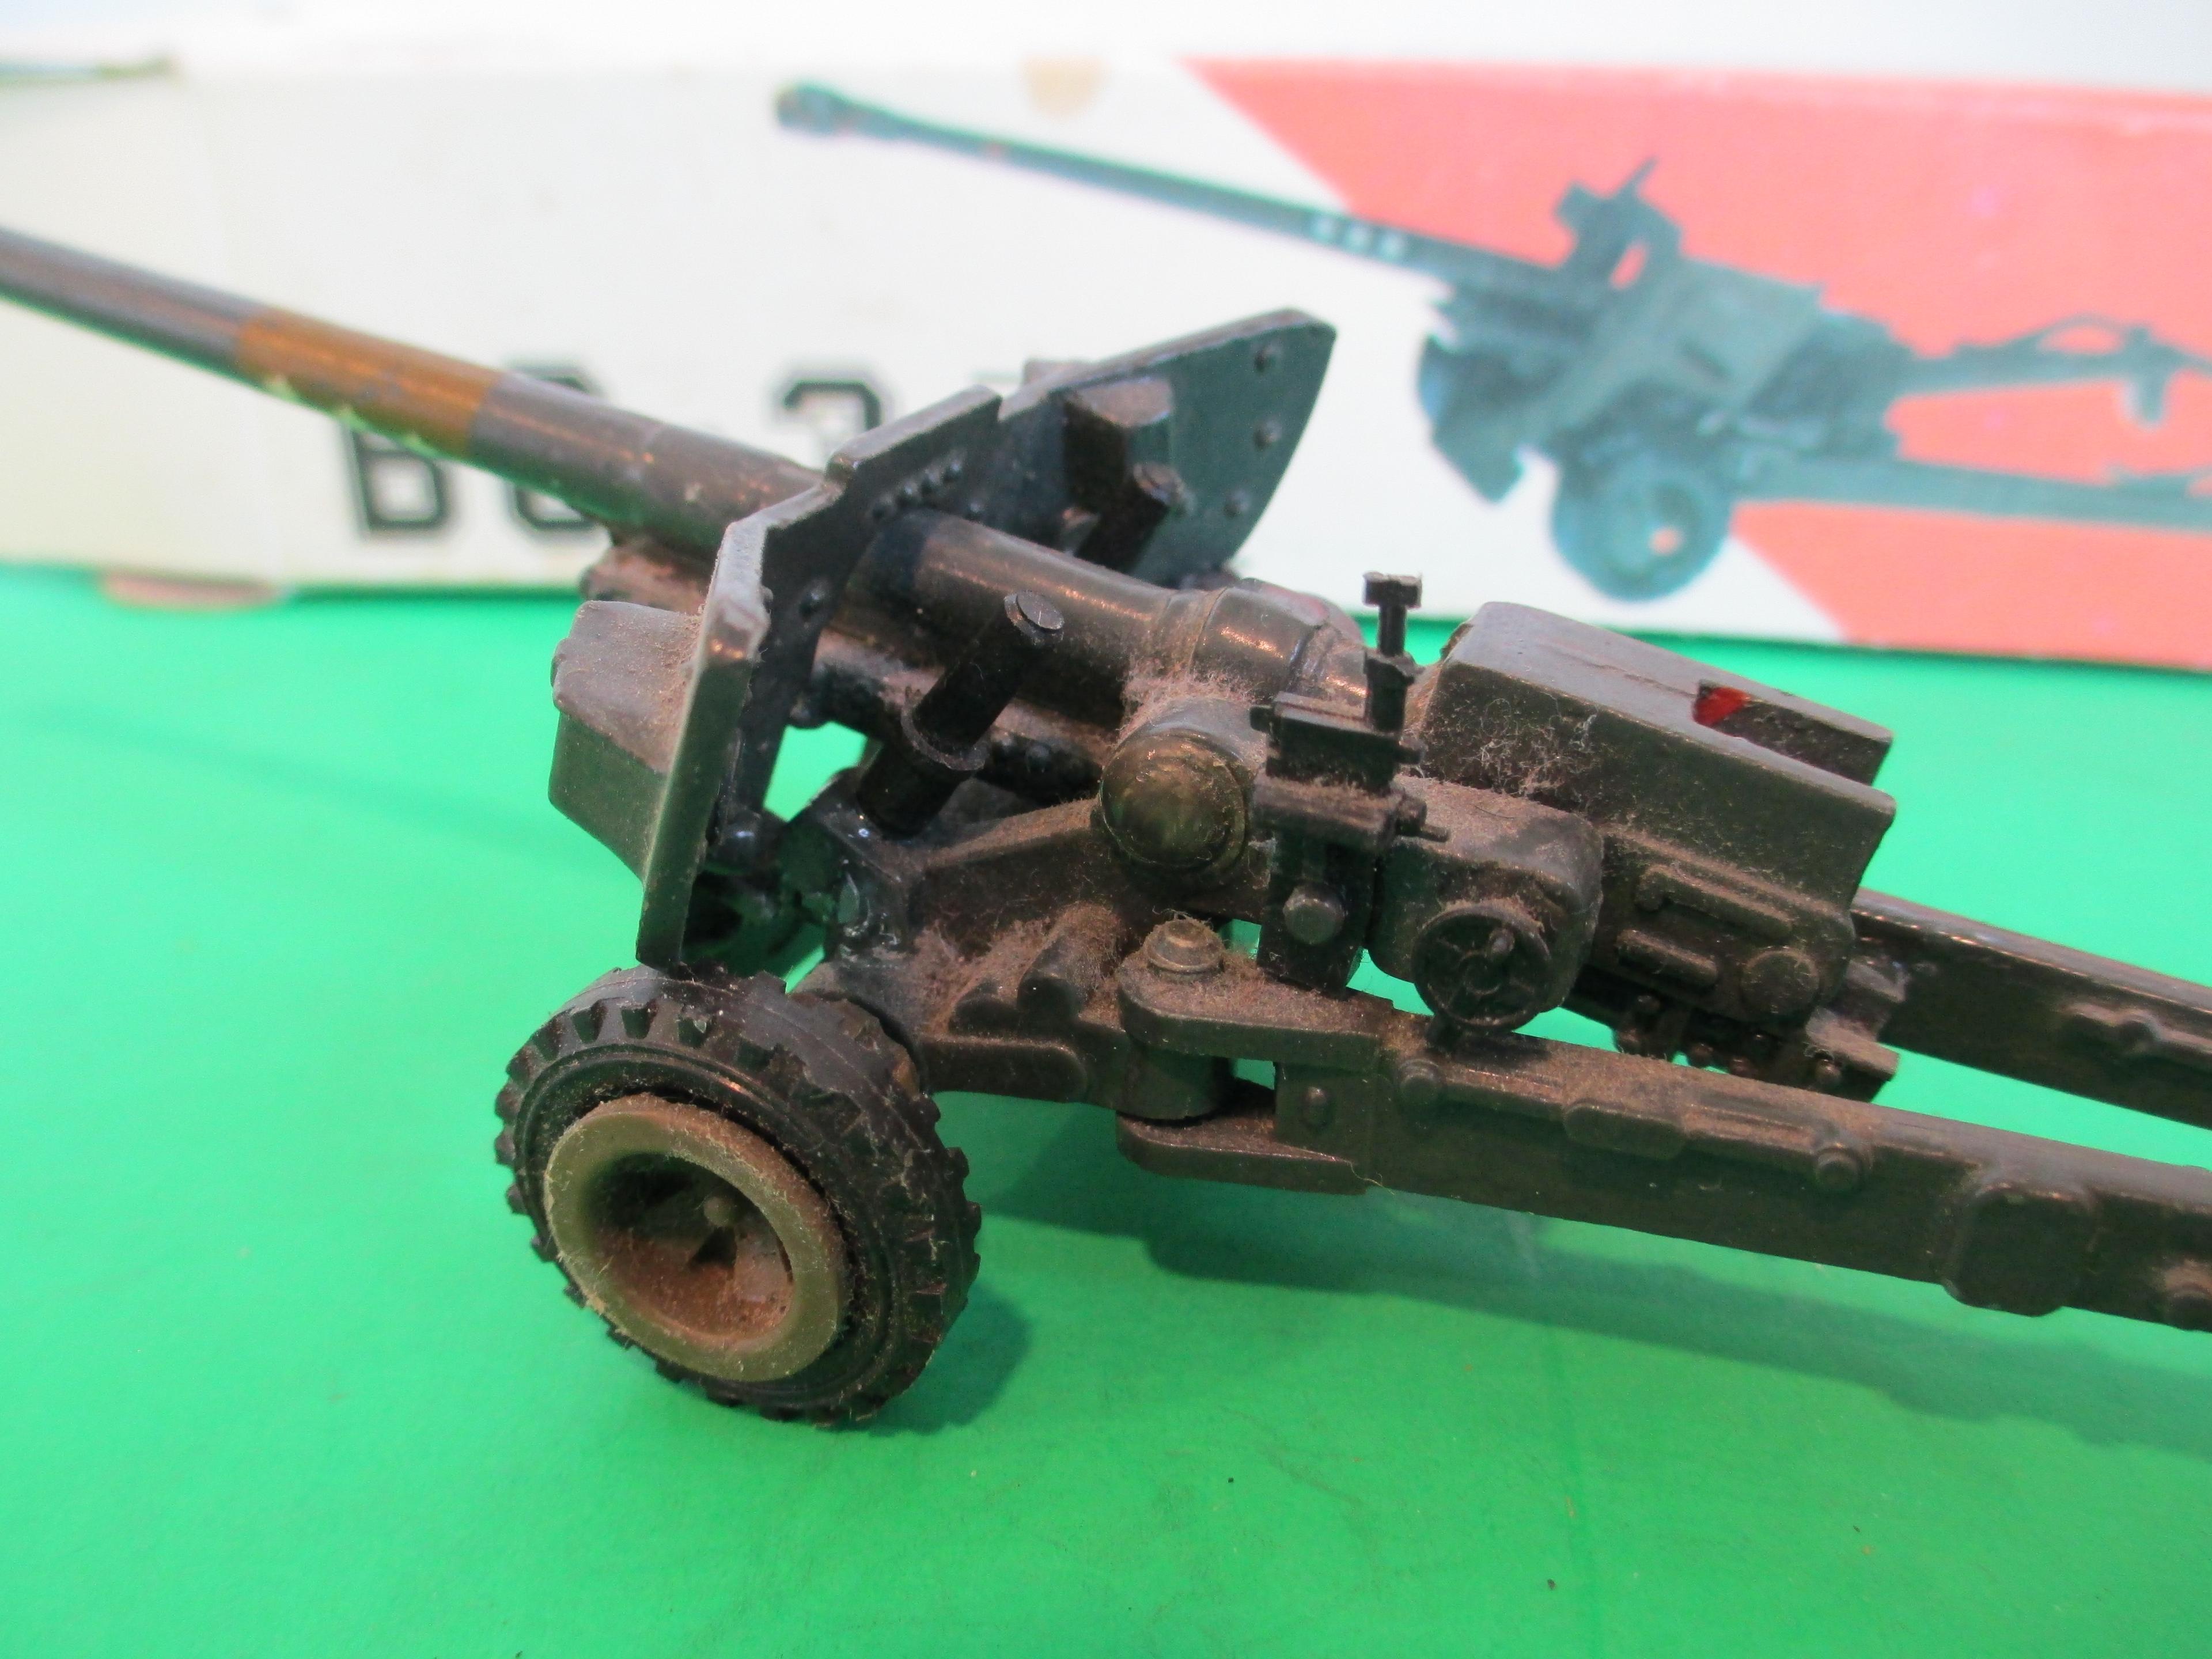 1:43 Scale Russian Military Cannon Toy